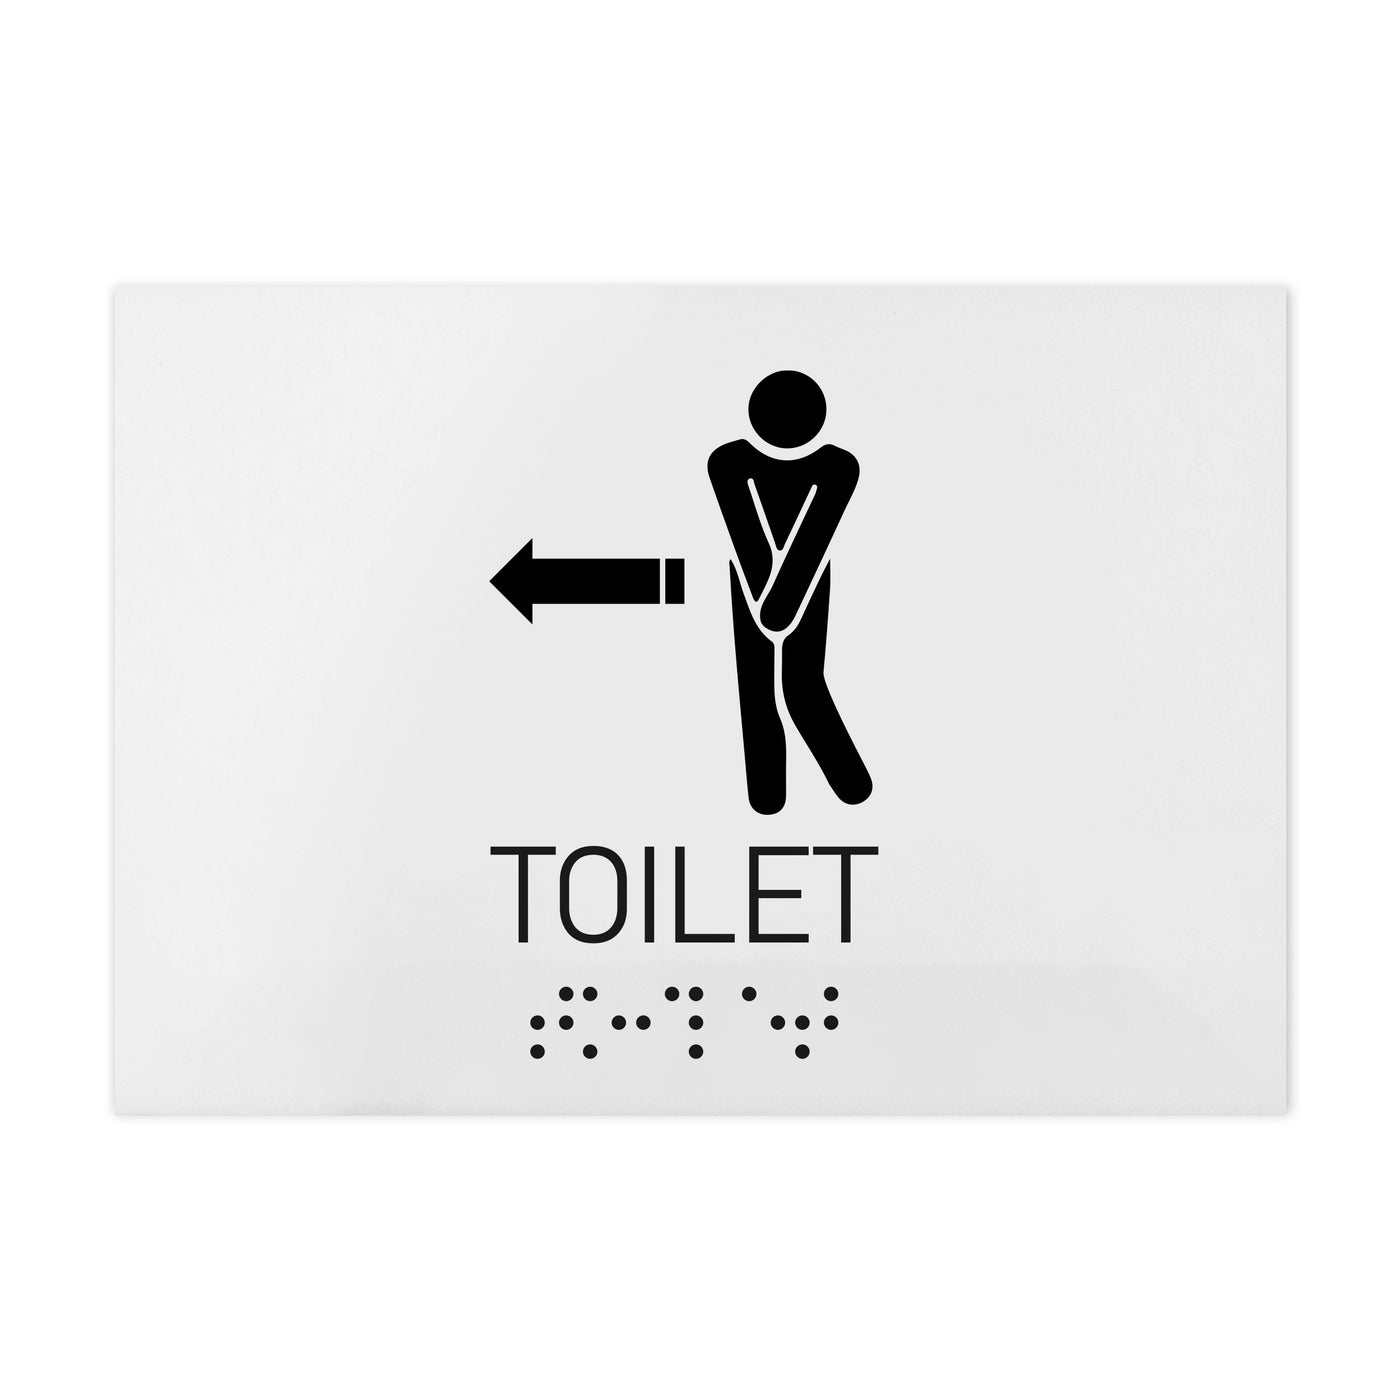 funny toilet signs for men